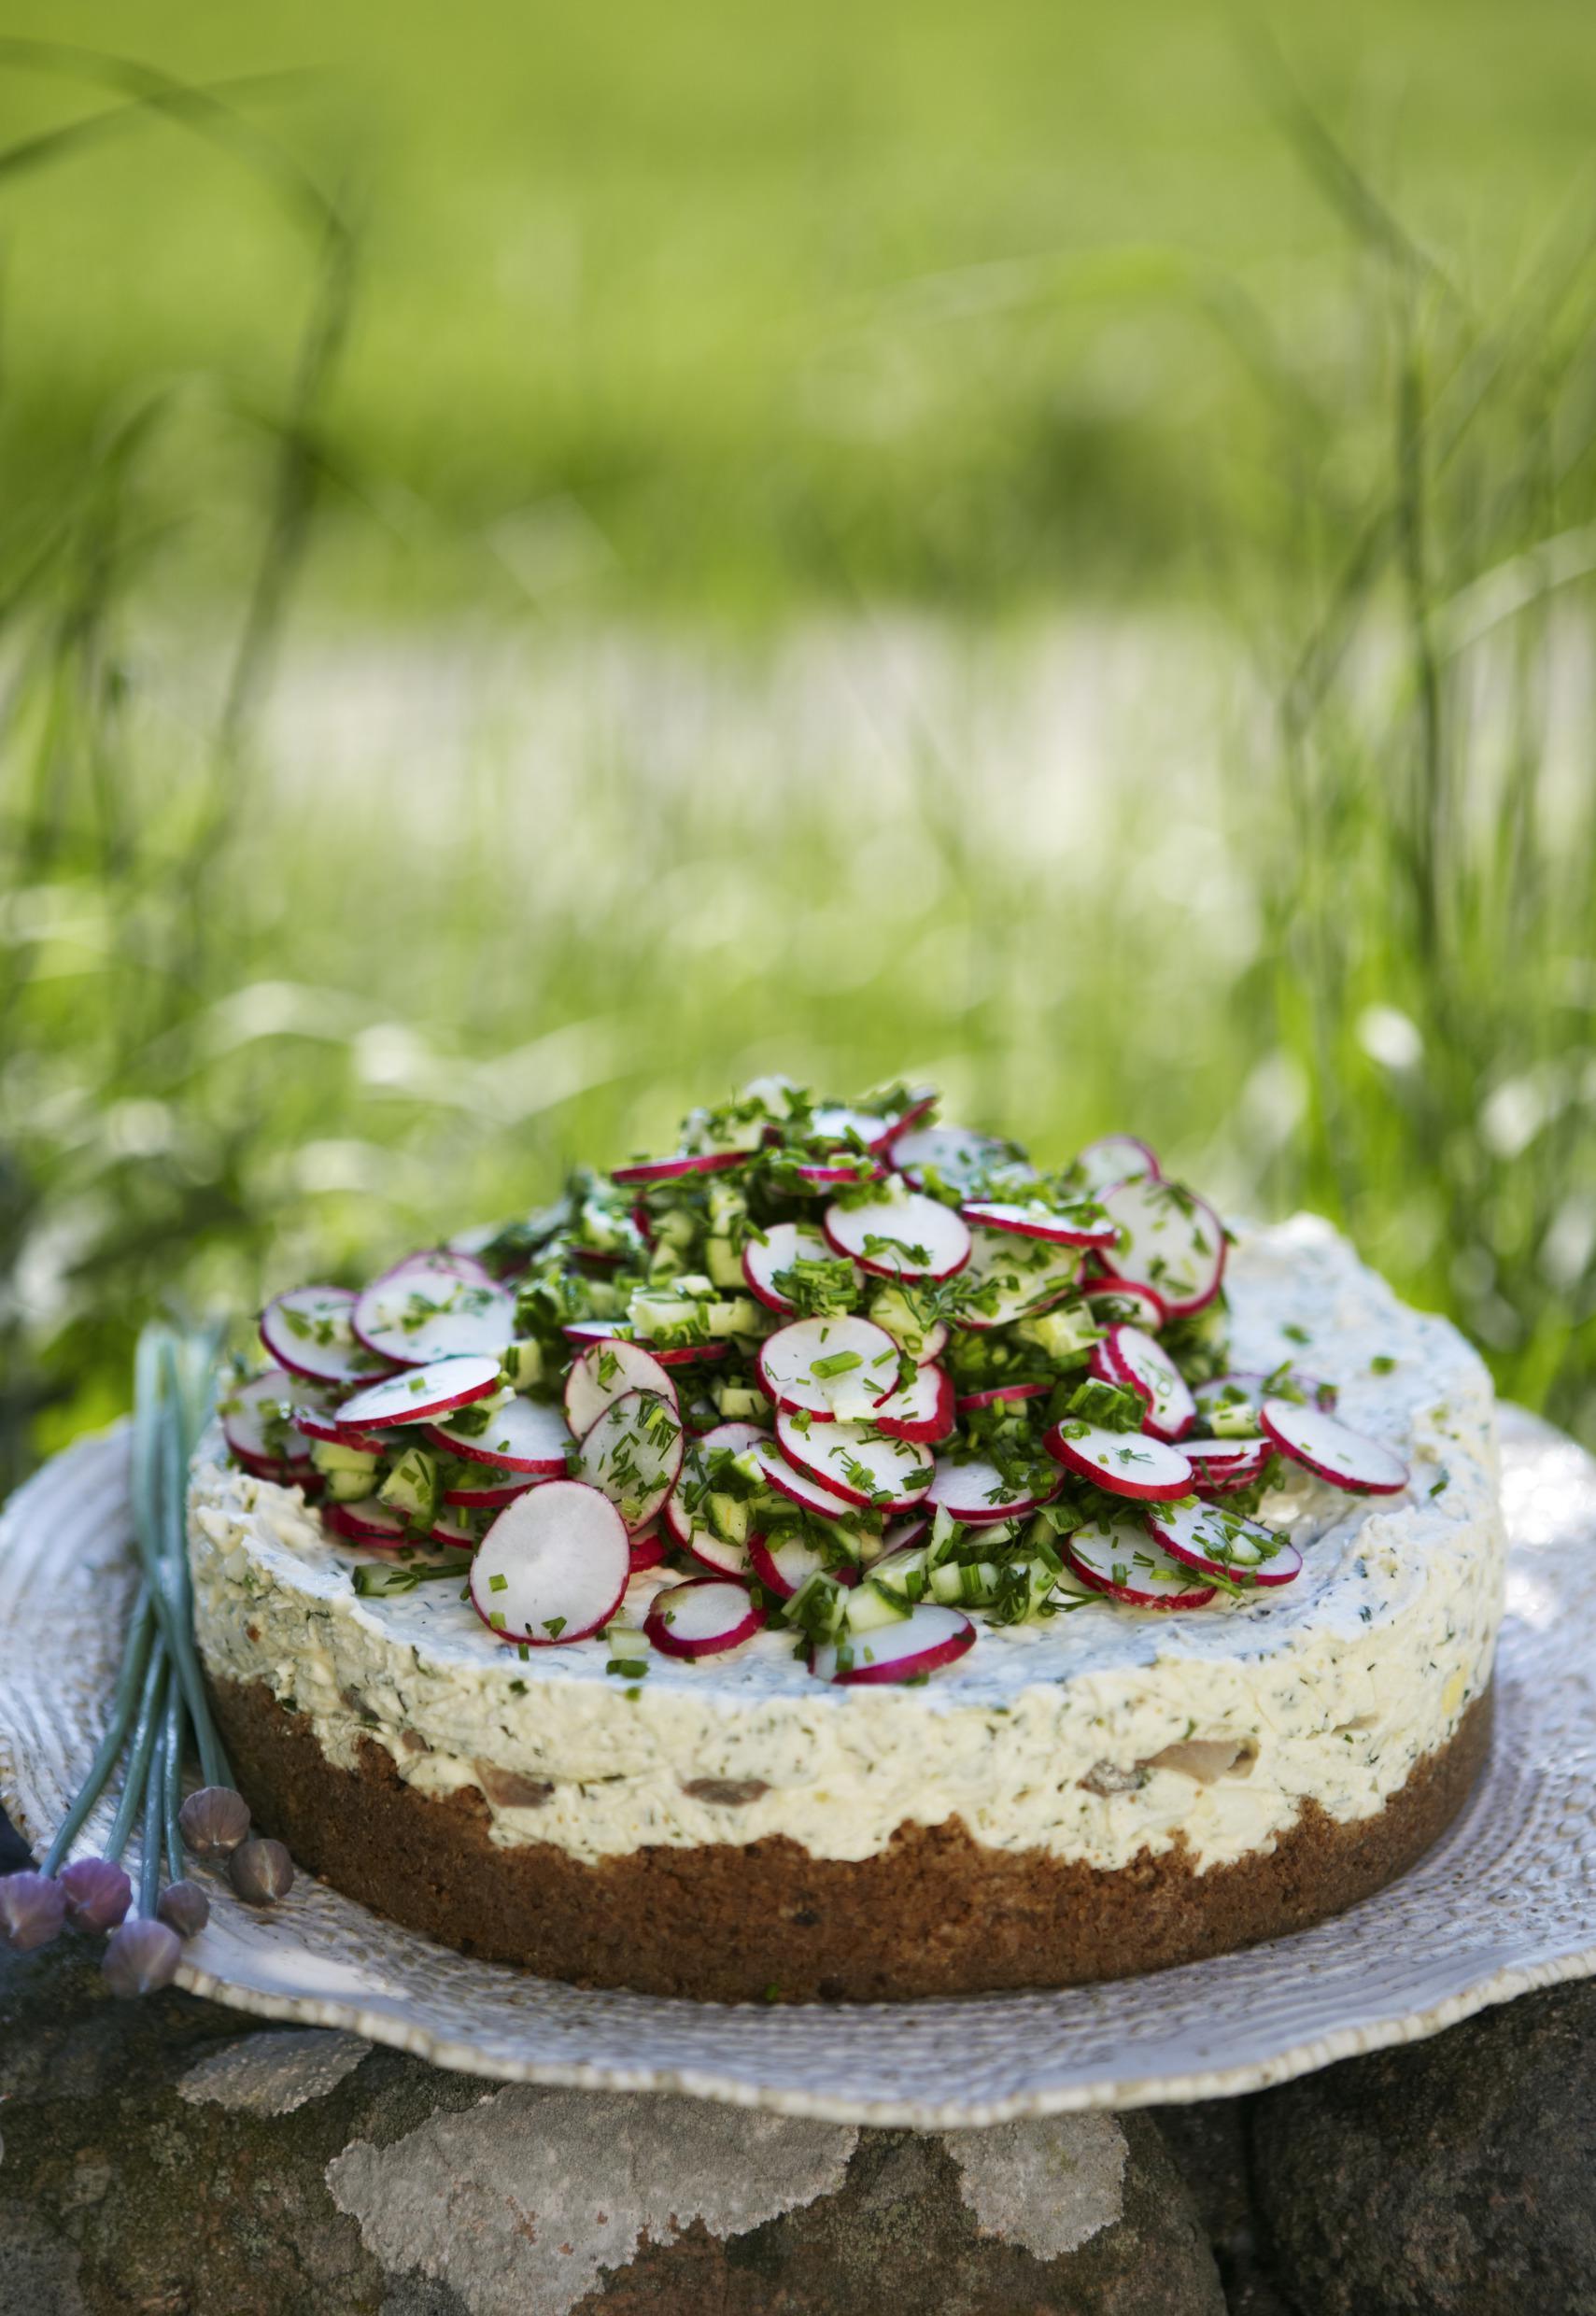 A sandwich cake covered in slices of radishes, presented on a plate in the outdoors.